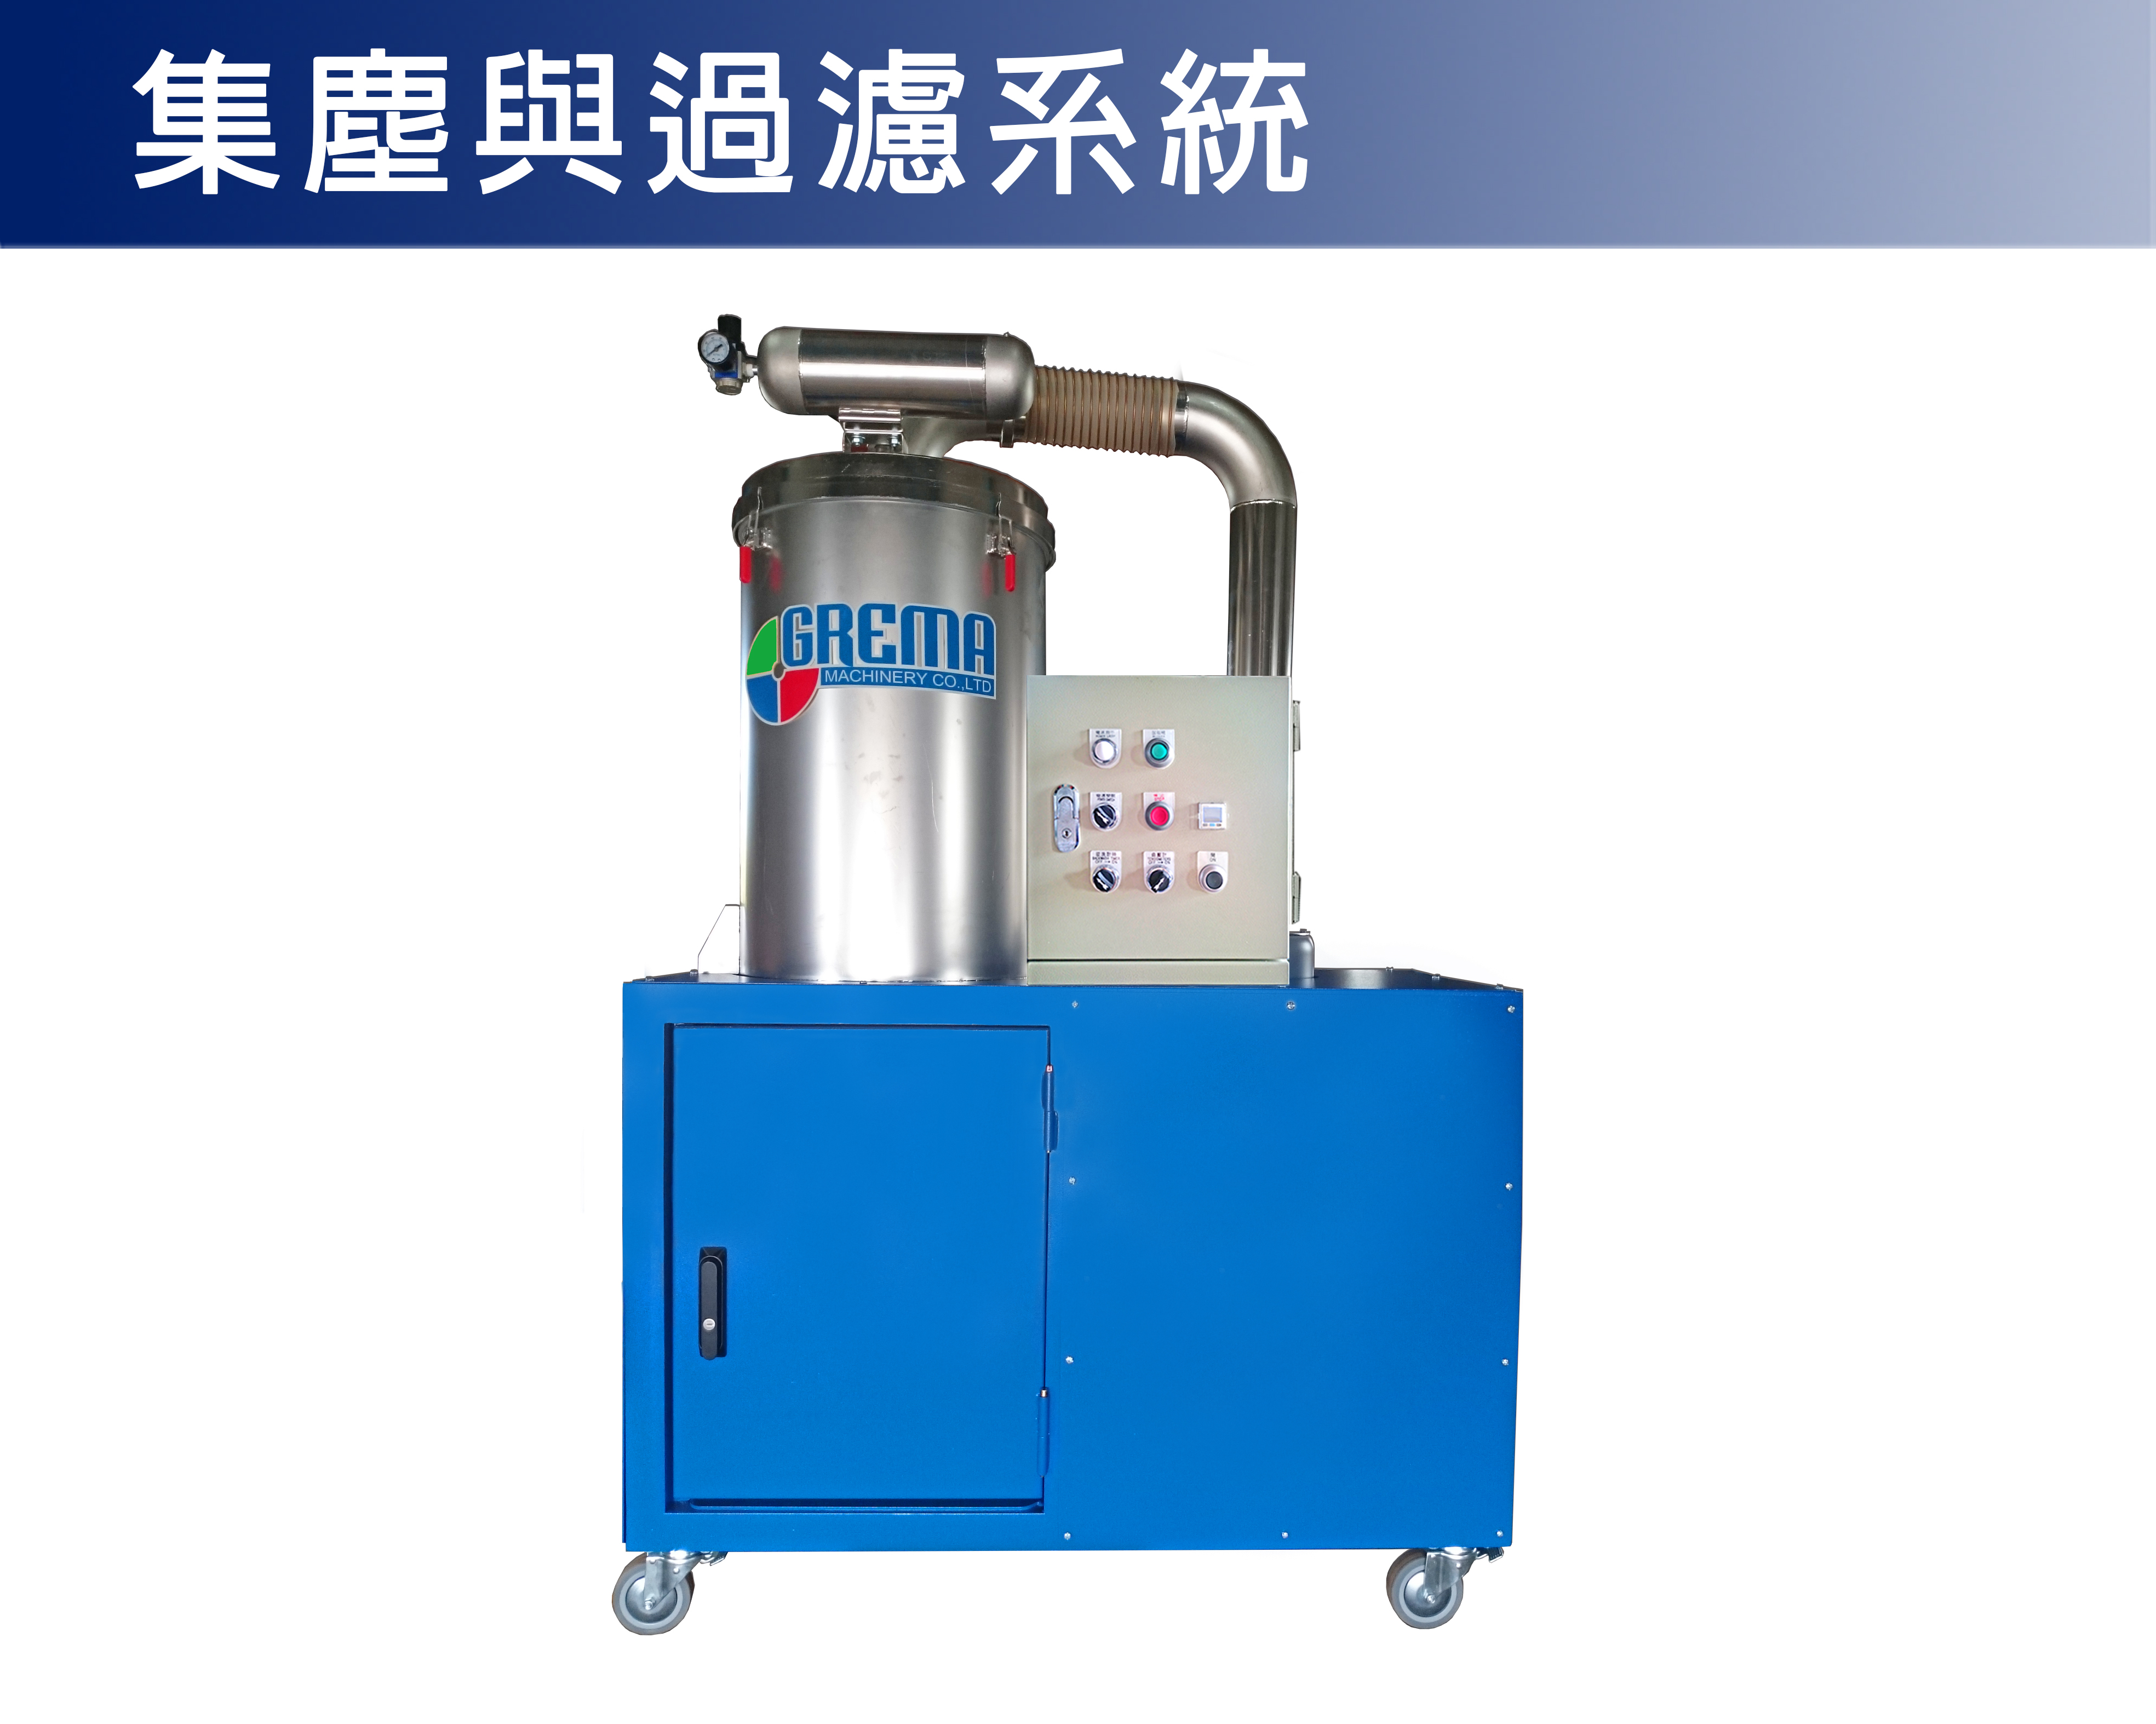 High pressure plate-type dust collector [automatic backwashing system] (GH-B)